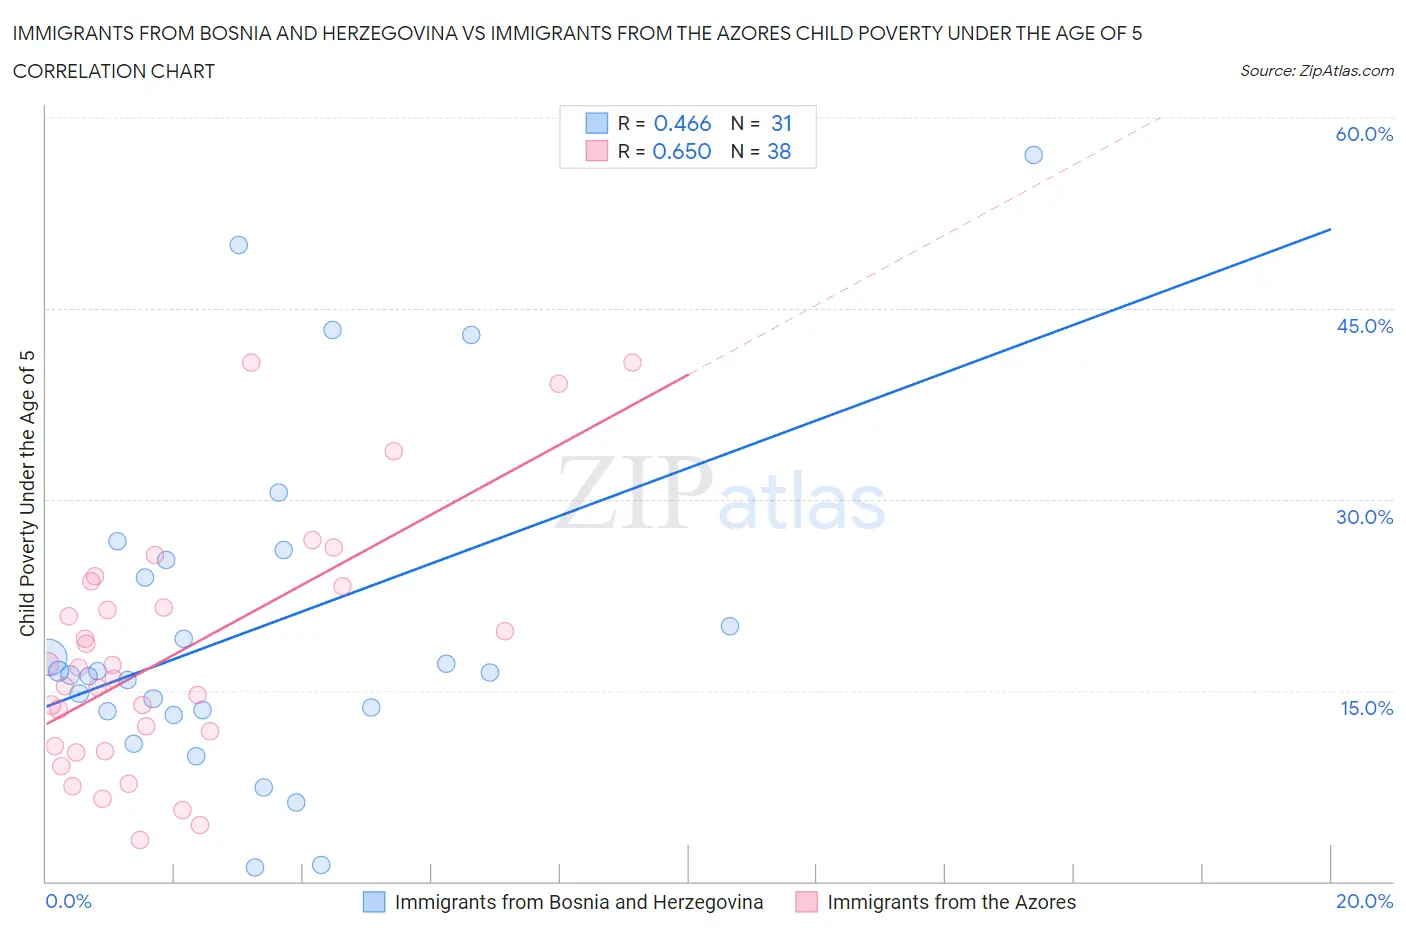 Immigrants from Bosnia and Herzegovina vs Immigrants from the Azores Child Poverty Under the Age of 5